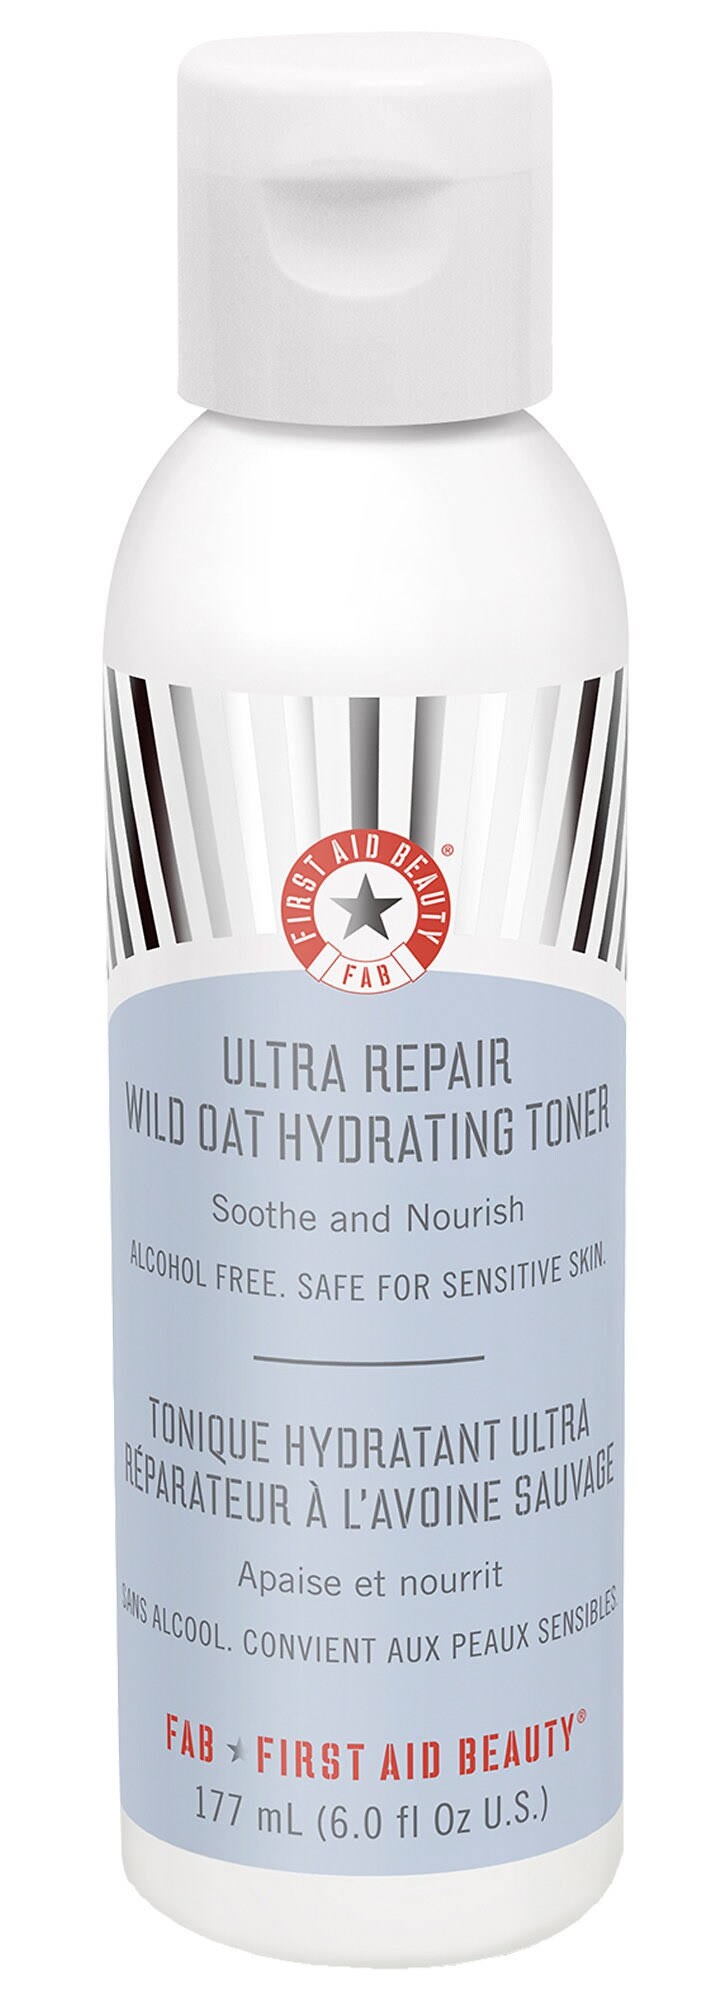 First Aid Beauty Ultra Repair Wild Oat Hydrating Toner